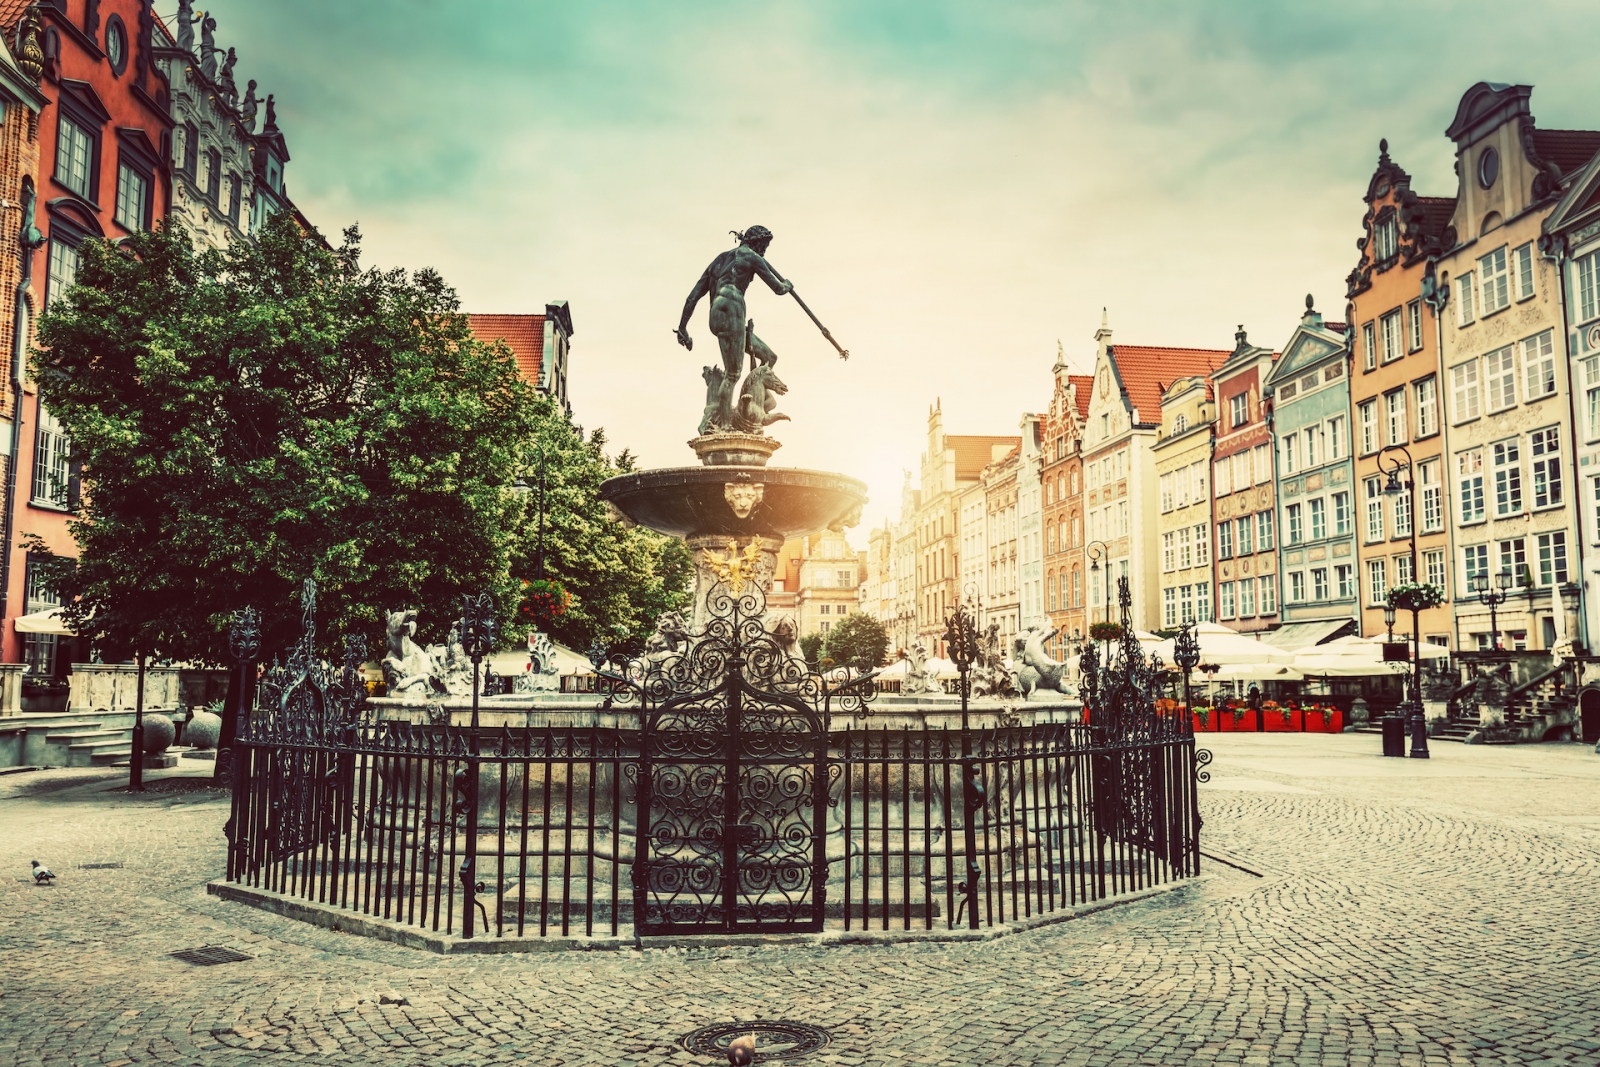 Neptune's fountain in the Old Town of Gdansk.